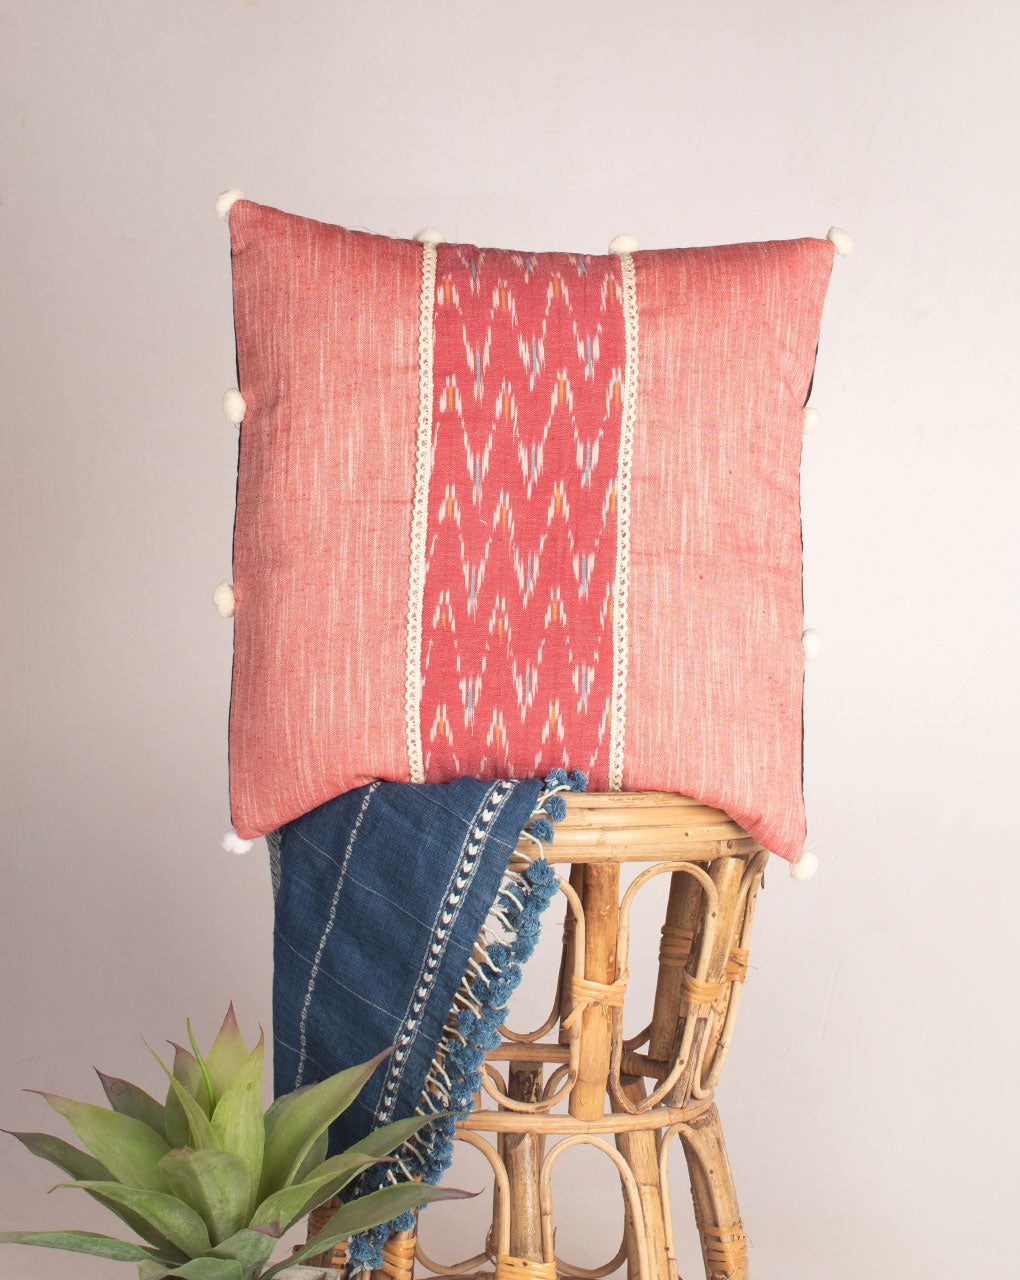 Hand Crafted Loom Textured Cotton Cushion Cover ( 16X16 Inches ) - Fabriclore.com